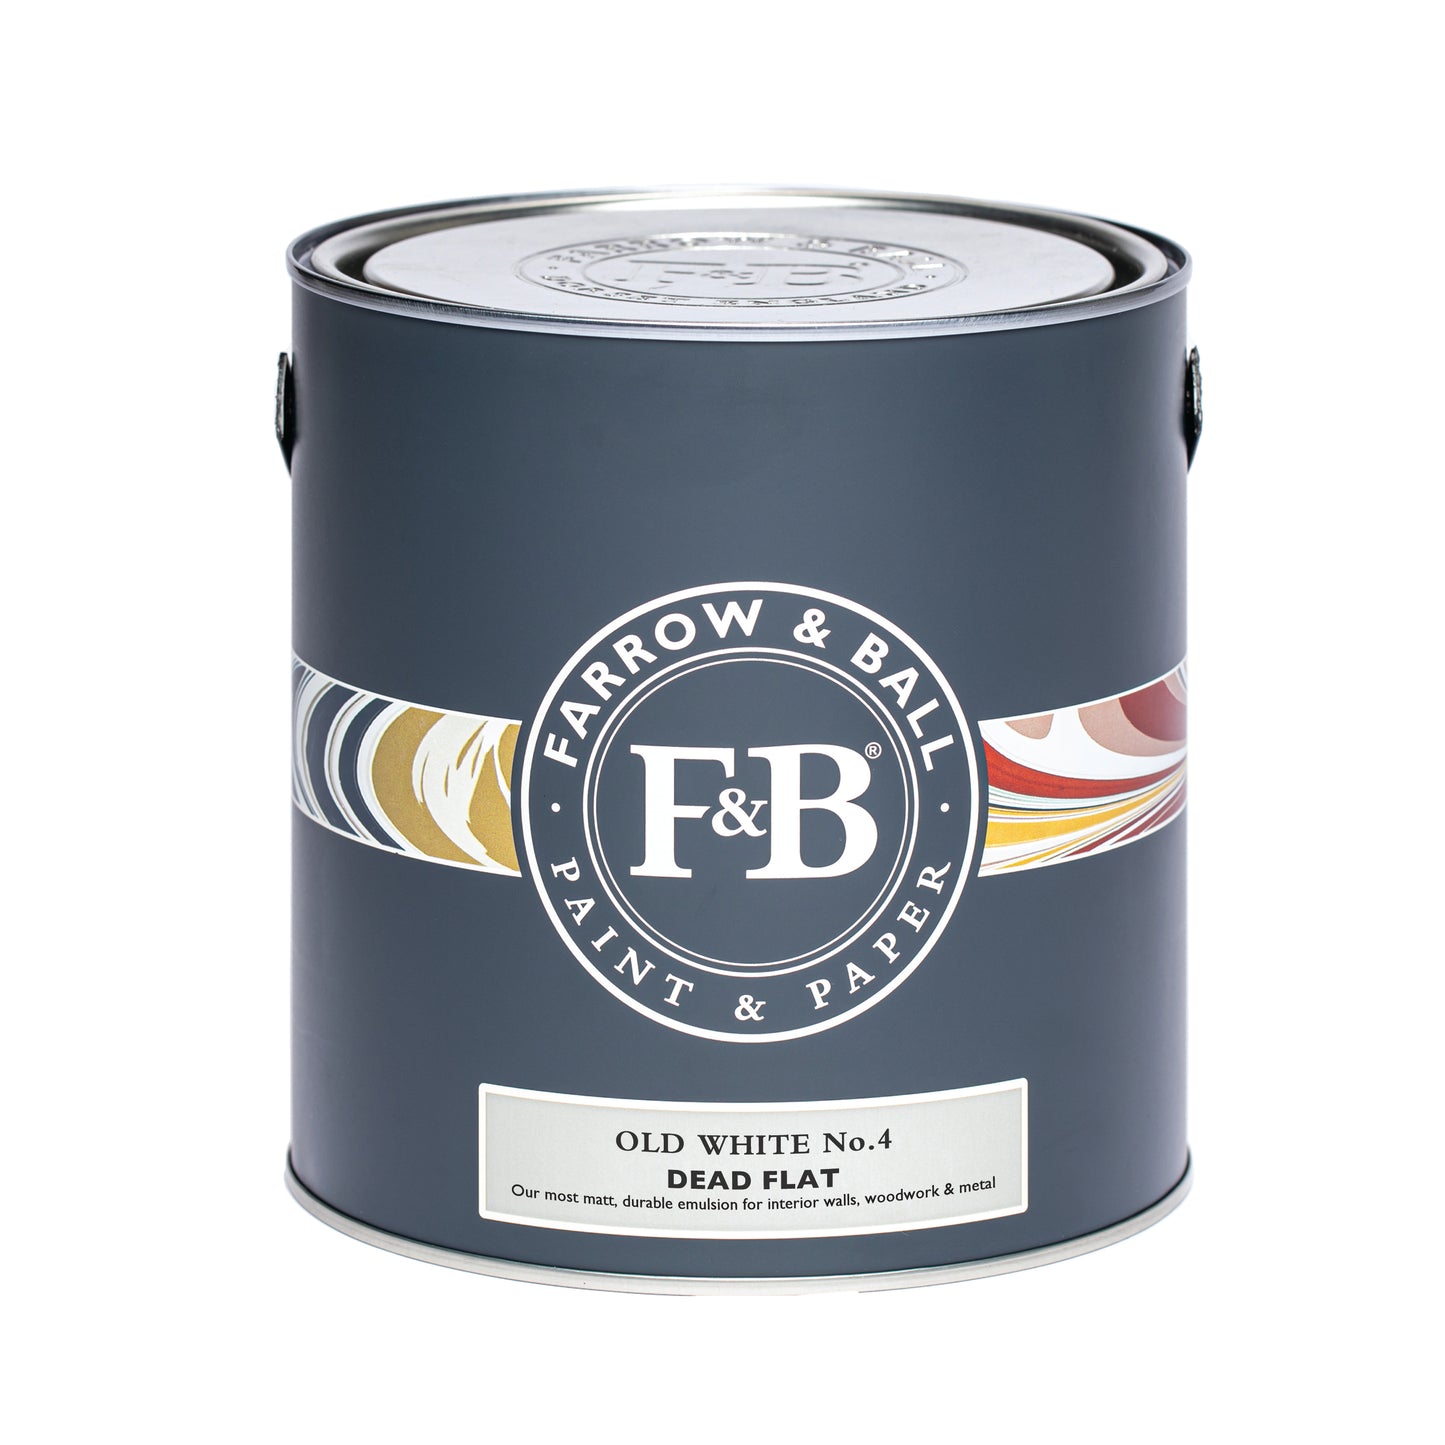 Old White 4 - Farrow and Ball - New Dead Flat